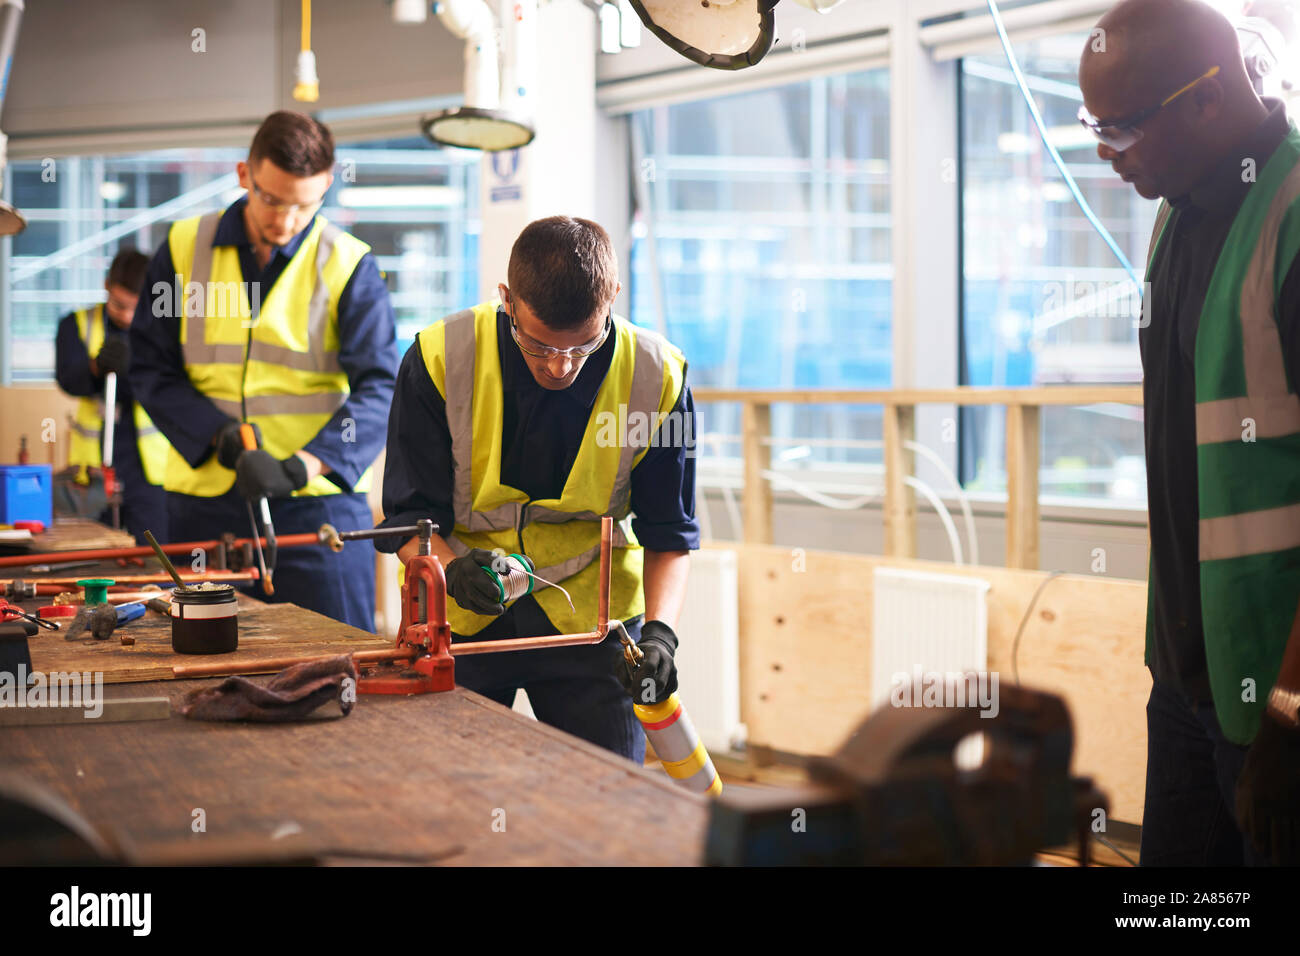 Male instructor watching student welding in workshop Stock Photo